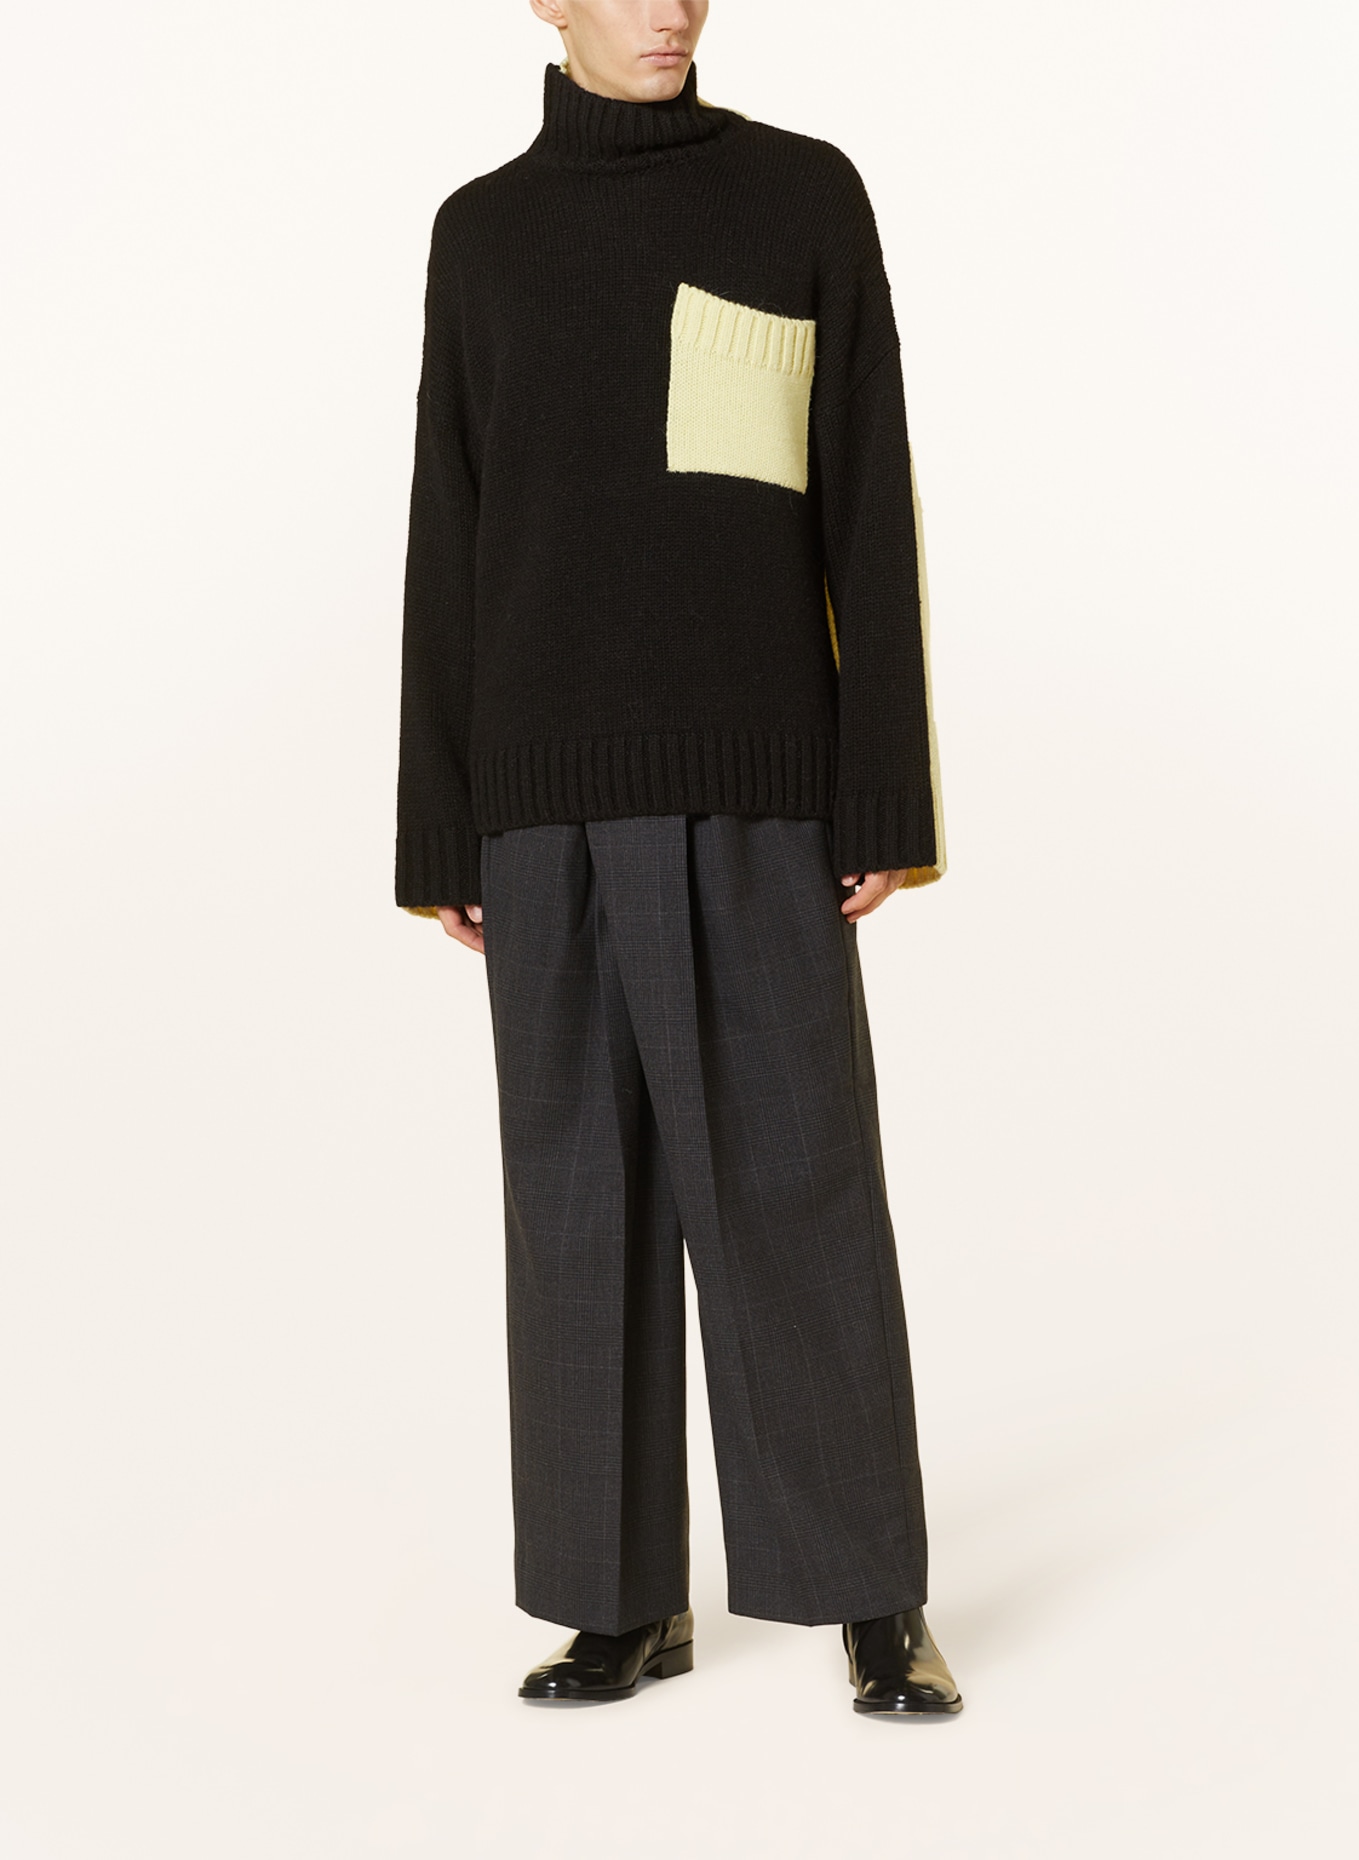 JW ANDERSON Sweater with alpaca, Color: BLACK/ LIGHT YELLOW (Image 2)